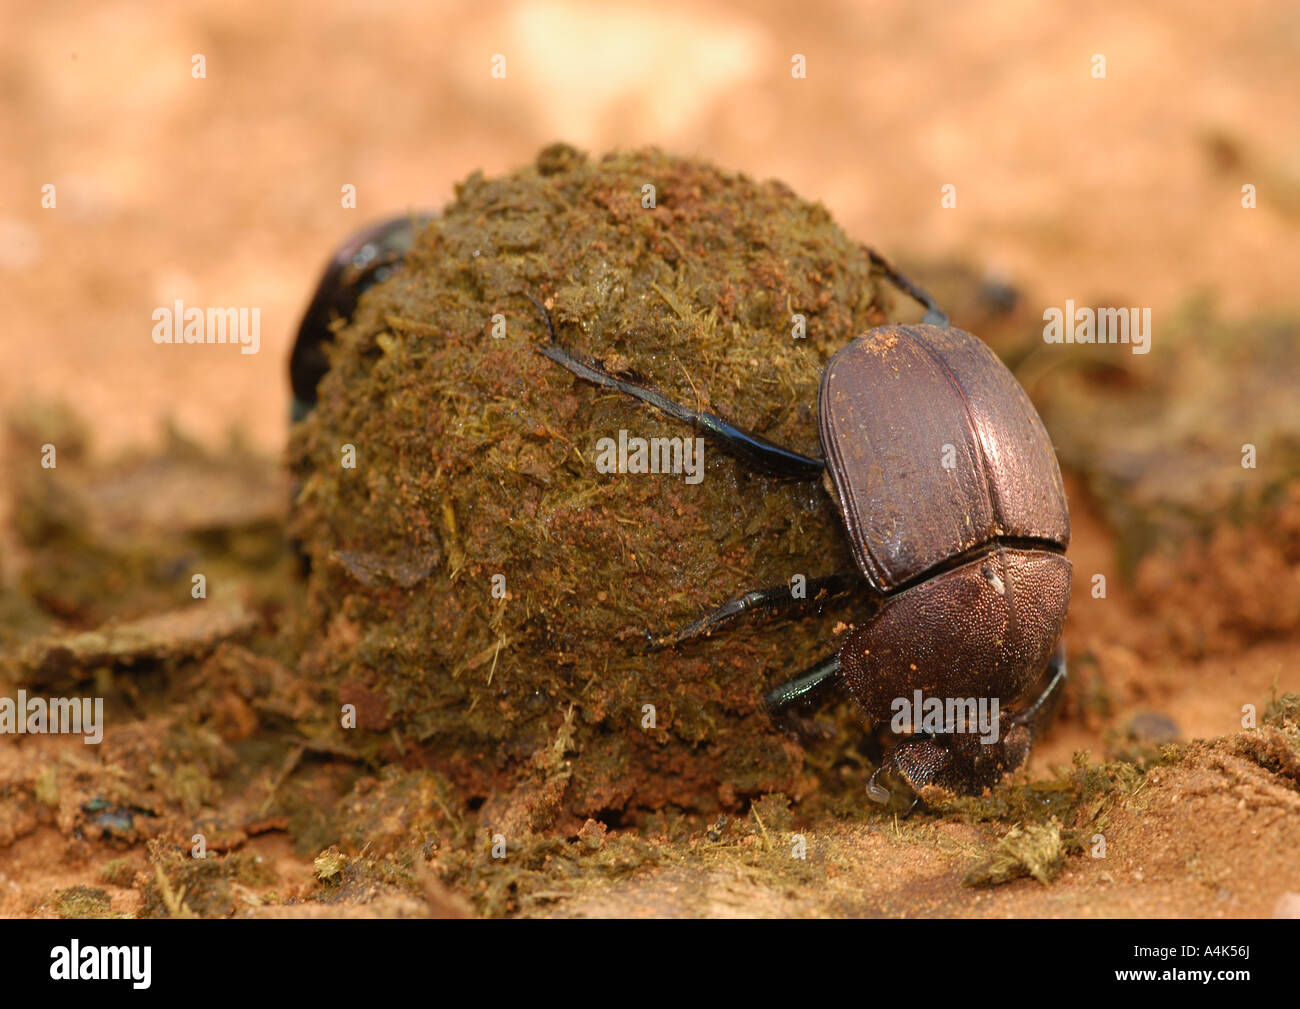 Dung beetles known as rollers are noted for rolling dung into spherical balls, Tanzania Stock Photo